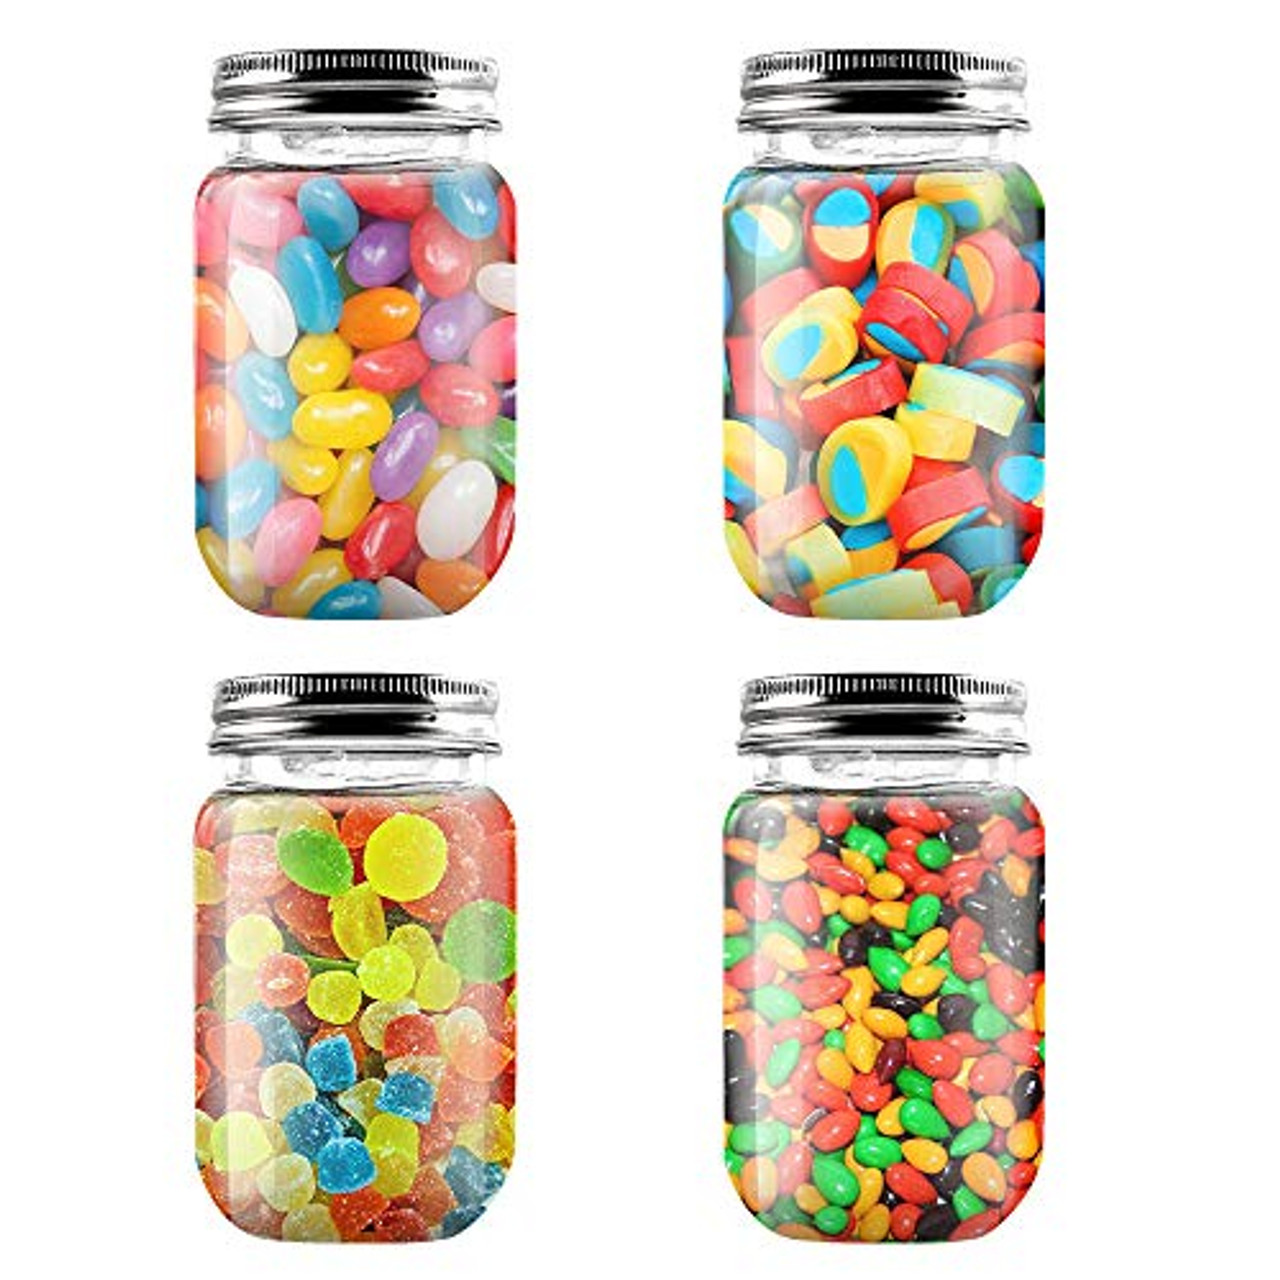 CLEAR PLASTIC CONTAINERS for Slime Twisted Lid Jars Screw on Slime Jars 1  Oz 2 Oz 4 Oz 6 Oz 8 Oz Jars 5 Pcs Set Slime Storage Jars for Craft 